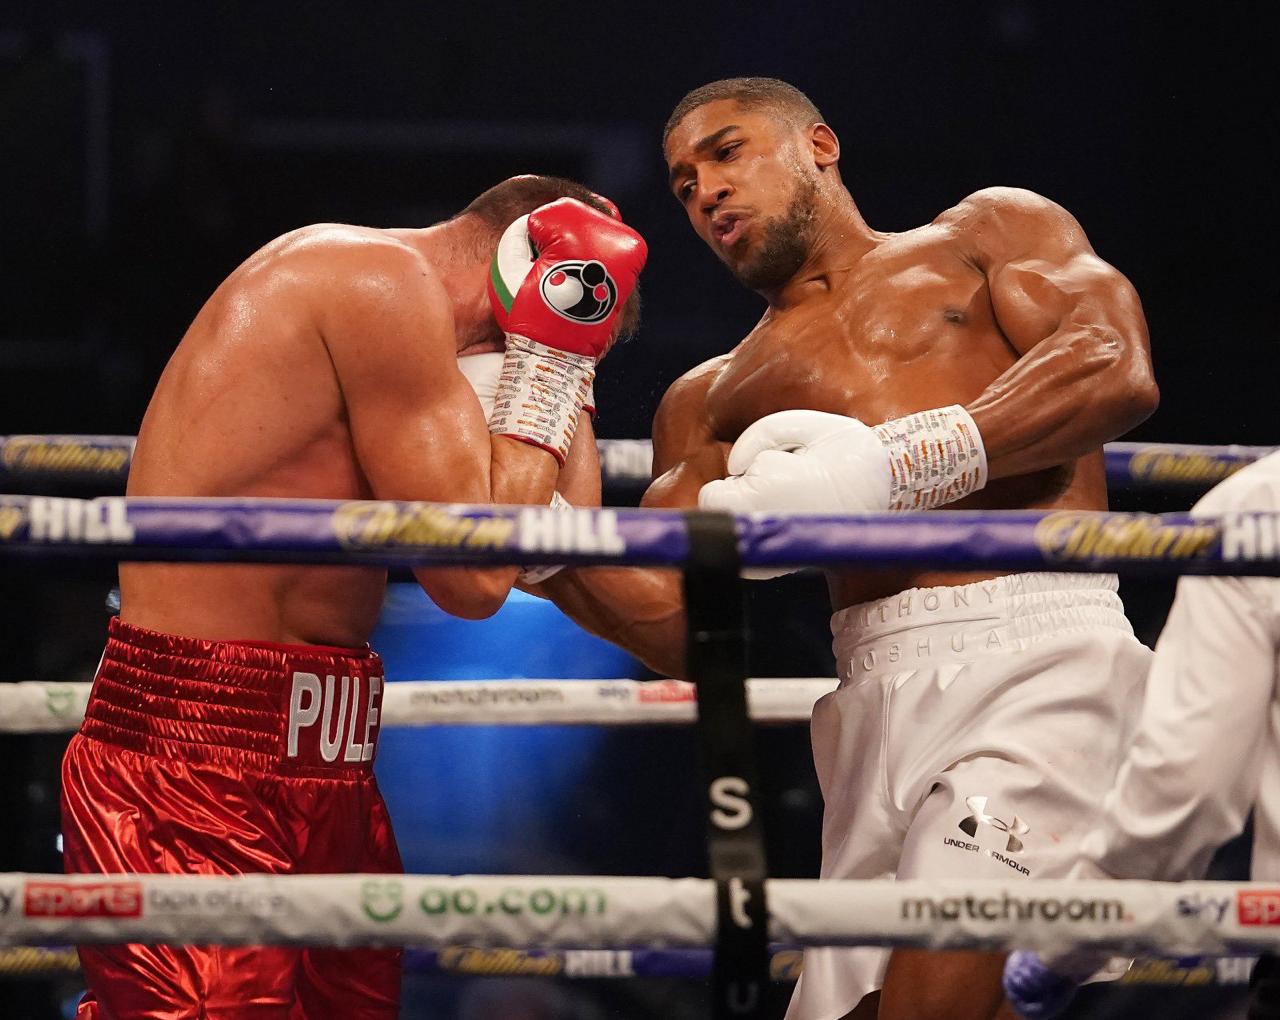 Anthony Joshua retained his belts and remains the king of the heavyweights